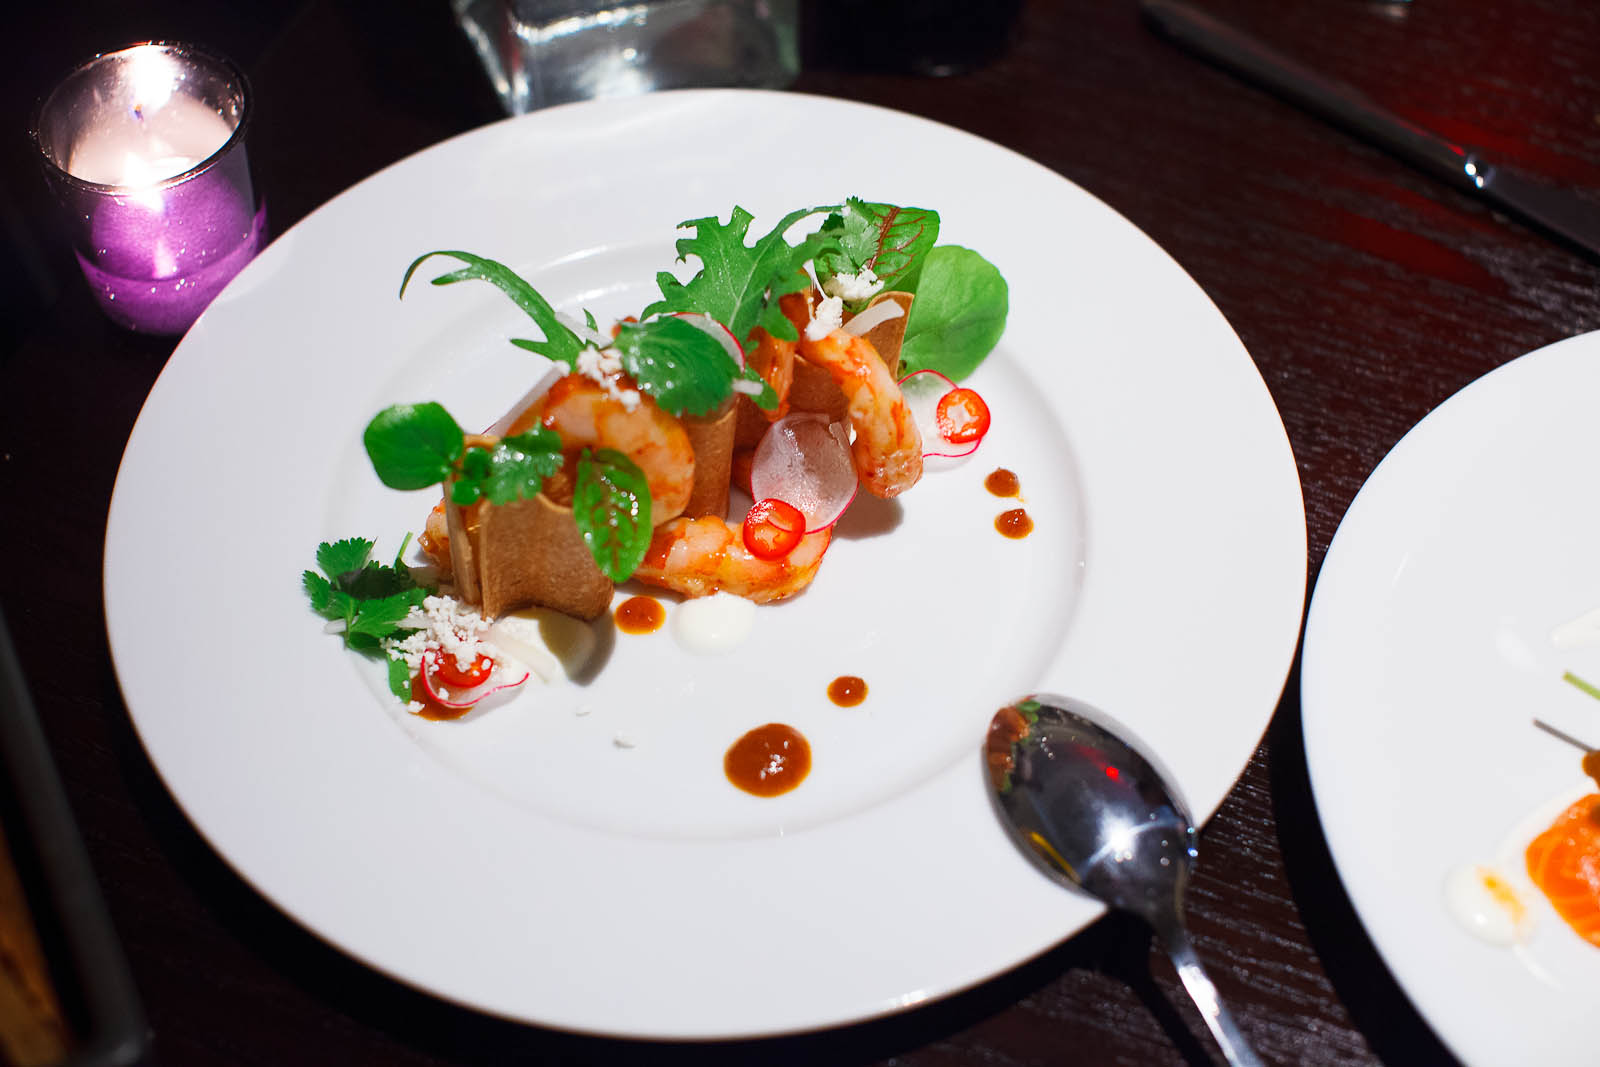 Ruby Red Shrimp with Crispy Masa, SeaUrchin Mousse and Lettuces